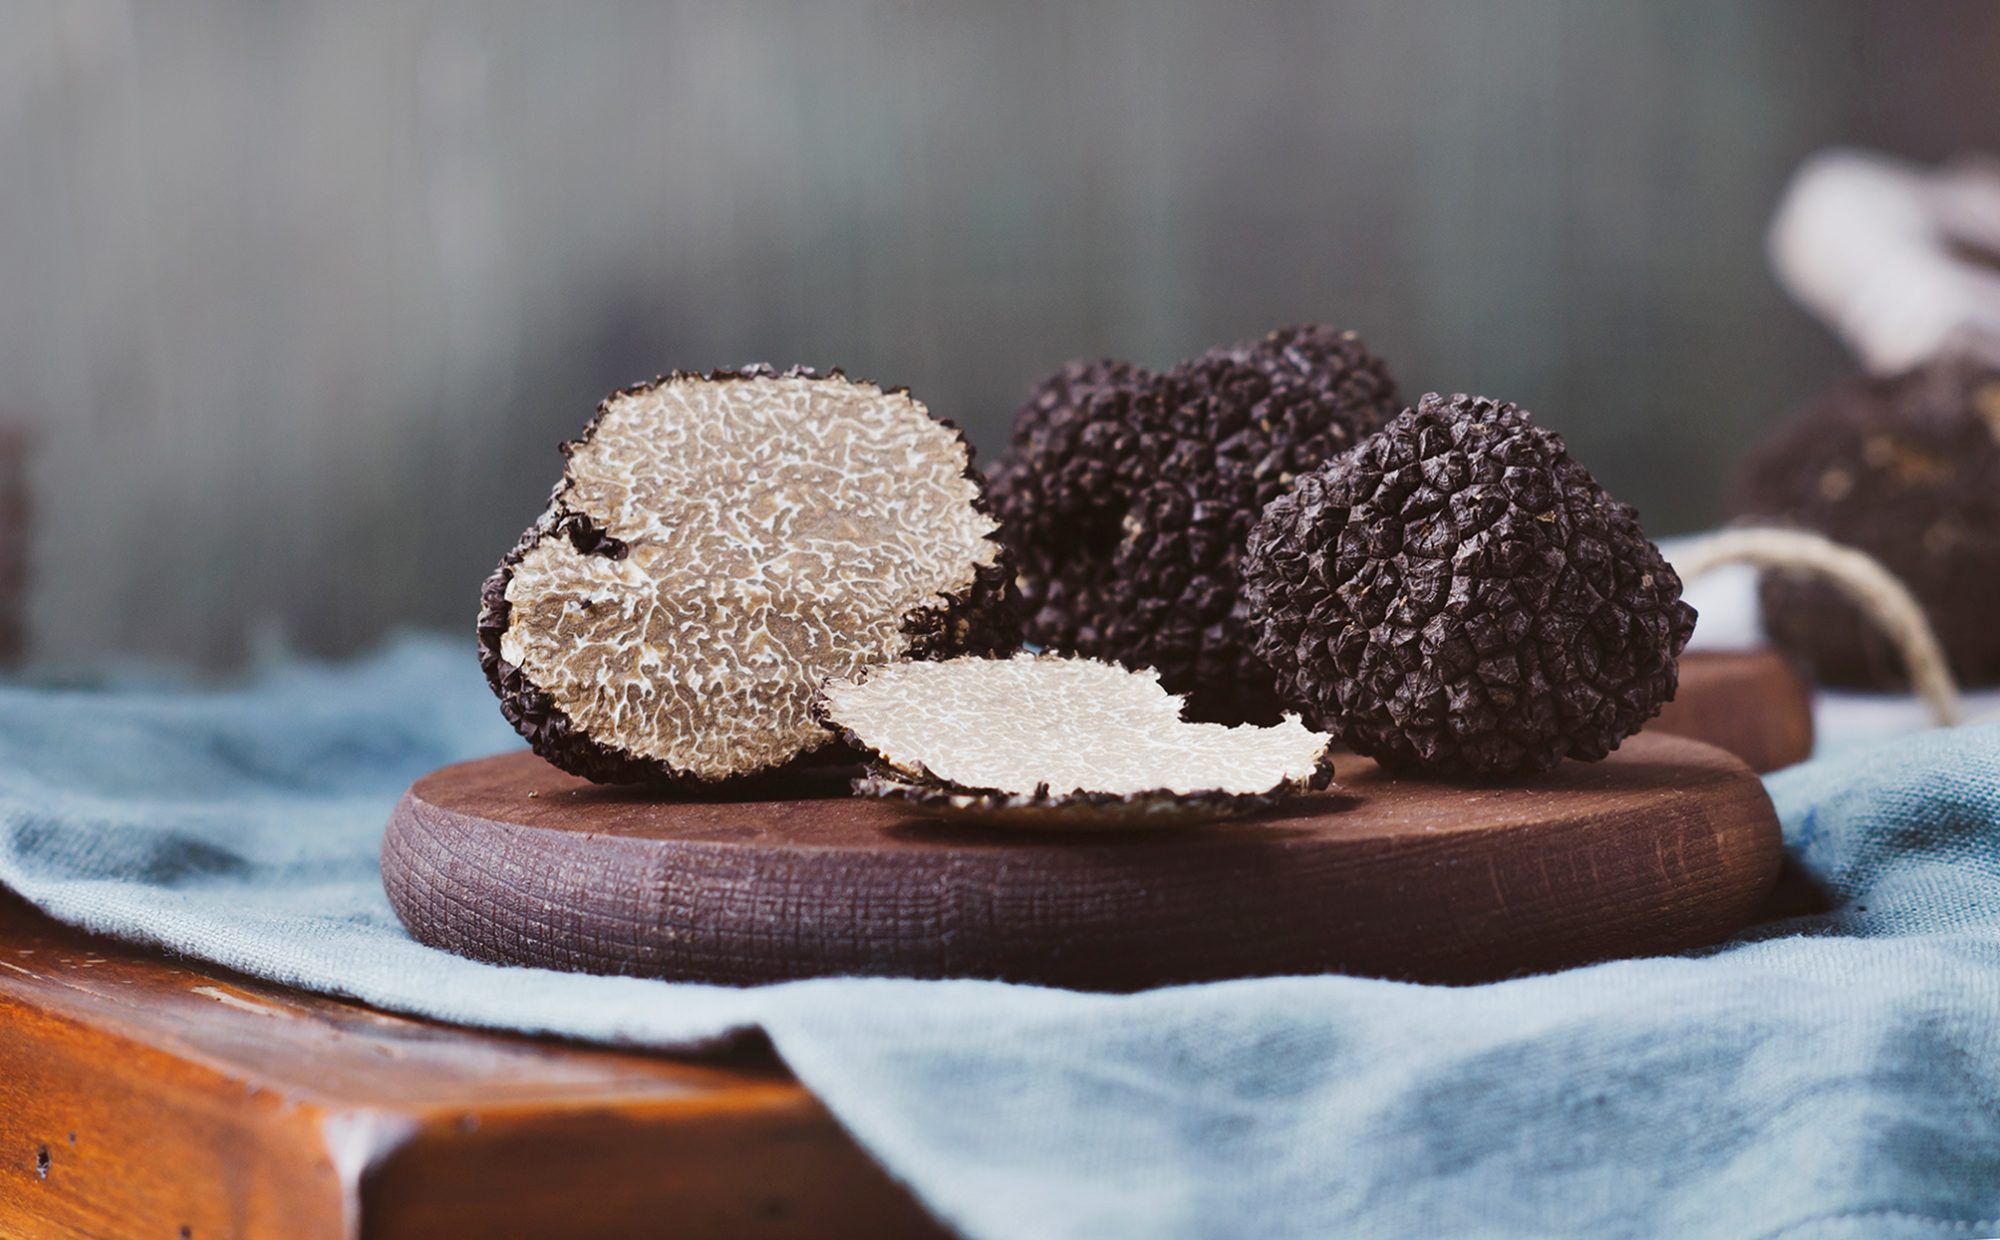 Seasonal Delicacy: Truffles are seasonal delicacies, with different varieties available at various times of the year. For example, black truffles are typically harvested from late autumn to winter, while white truffles are harvested in autumn. ]]>